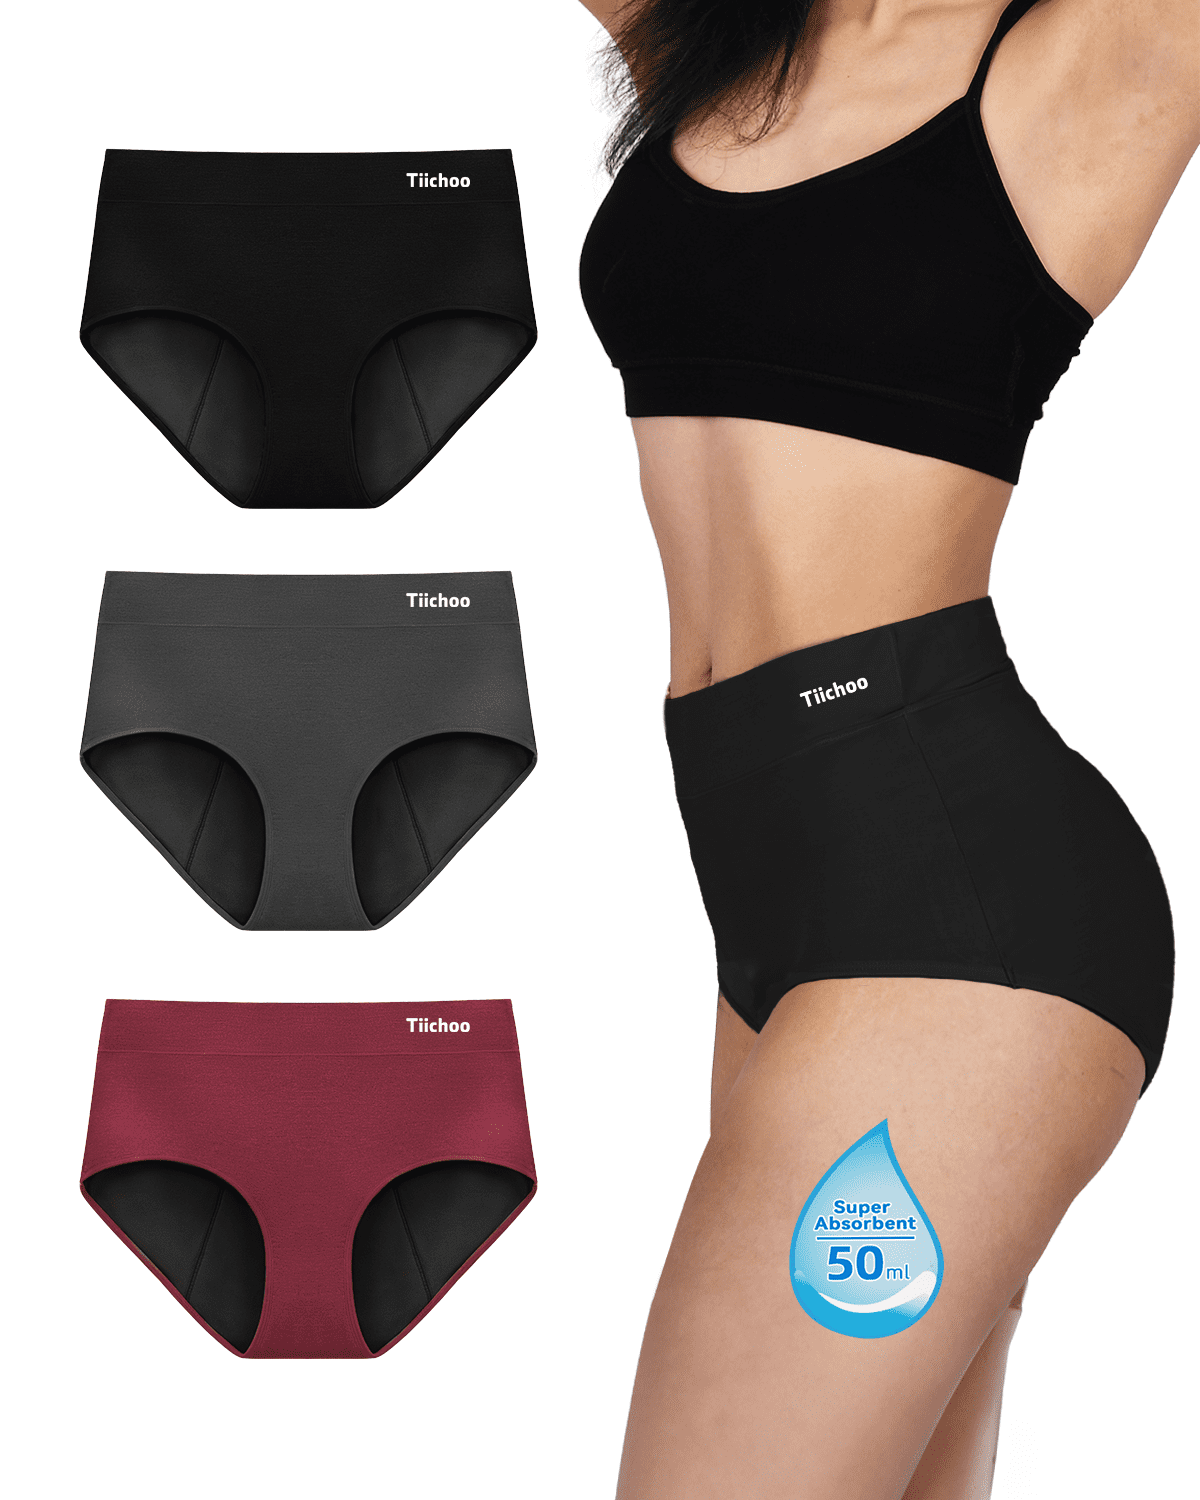 Suffer From Heavy Flow,Clot-Best Period Panty For Heavy Flow